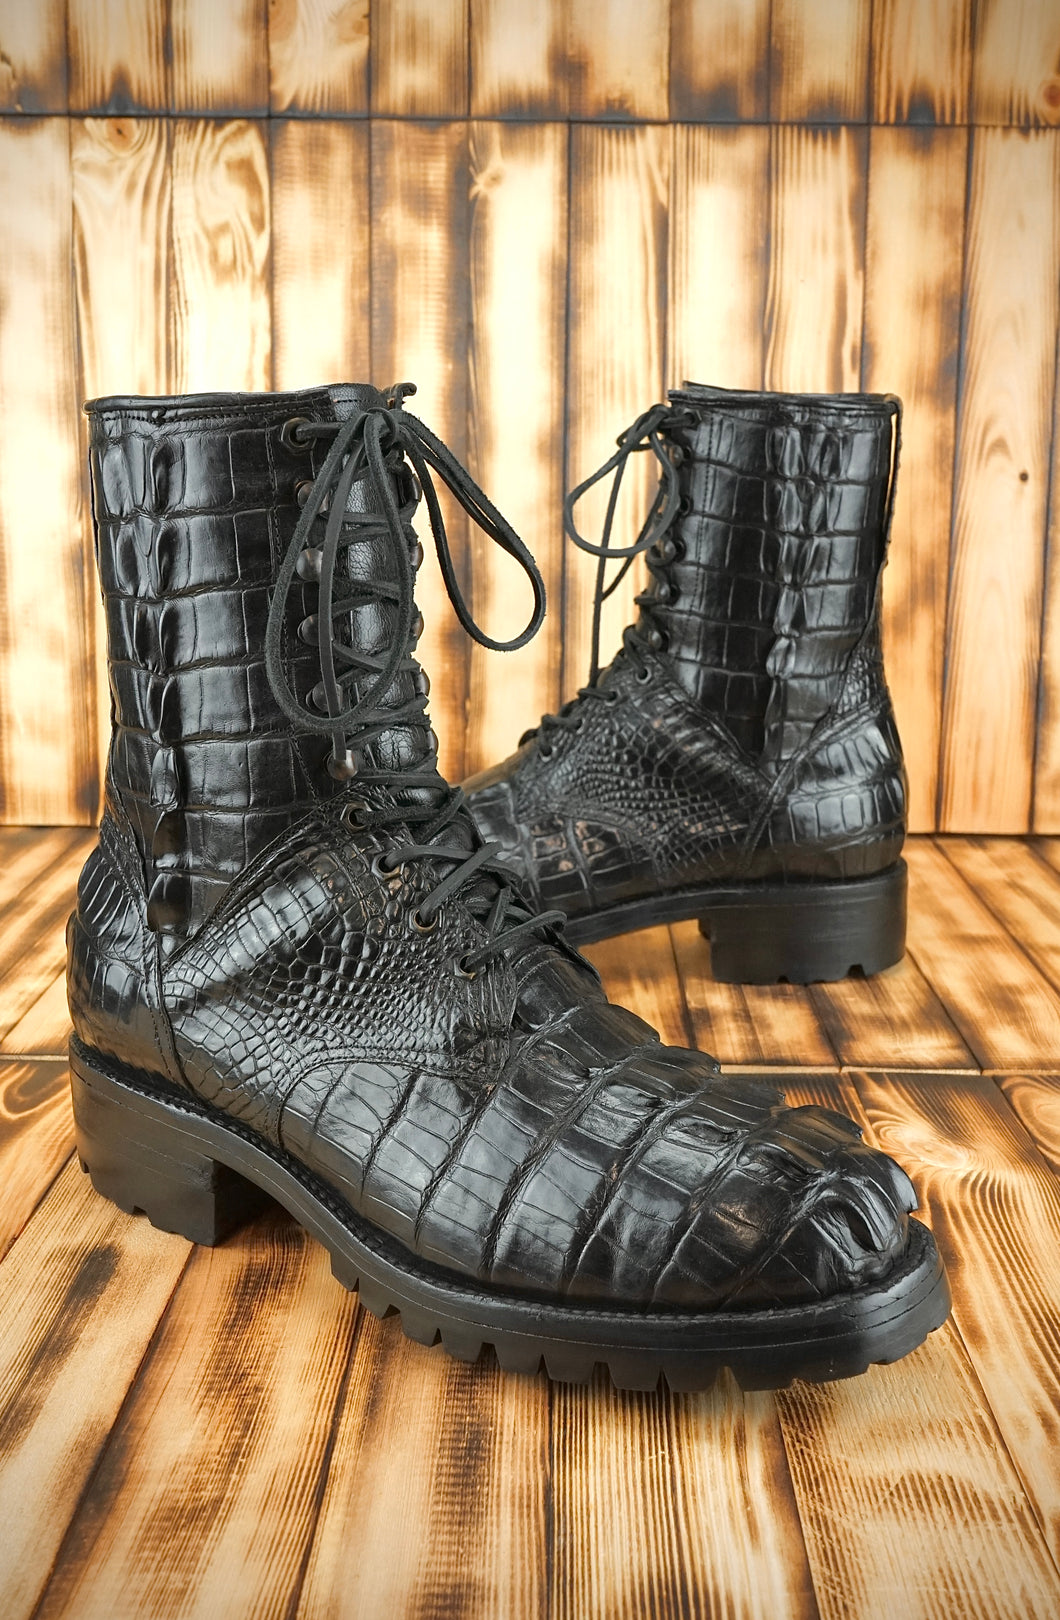 Rare Black Jack American Alligator Laced Up Boots 11D